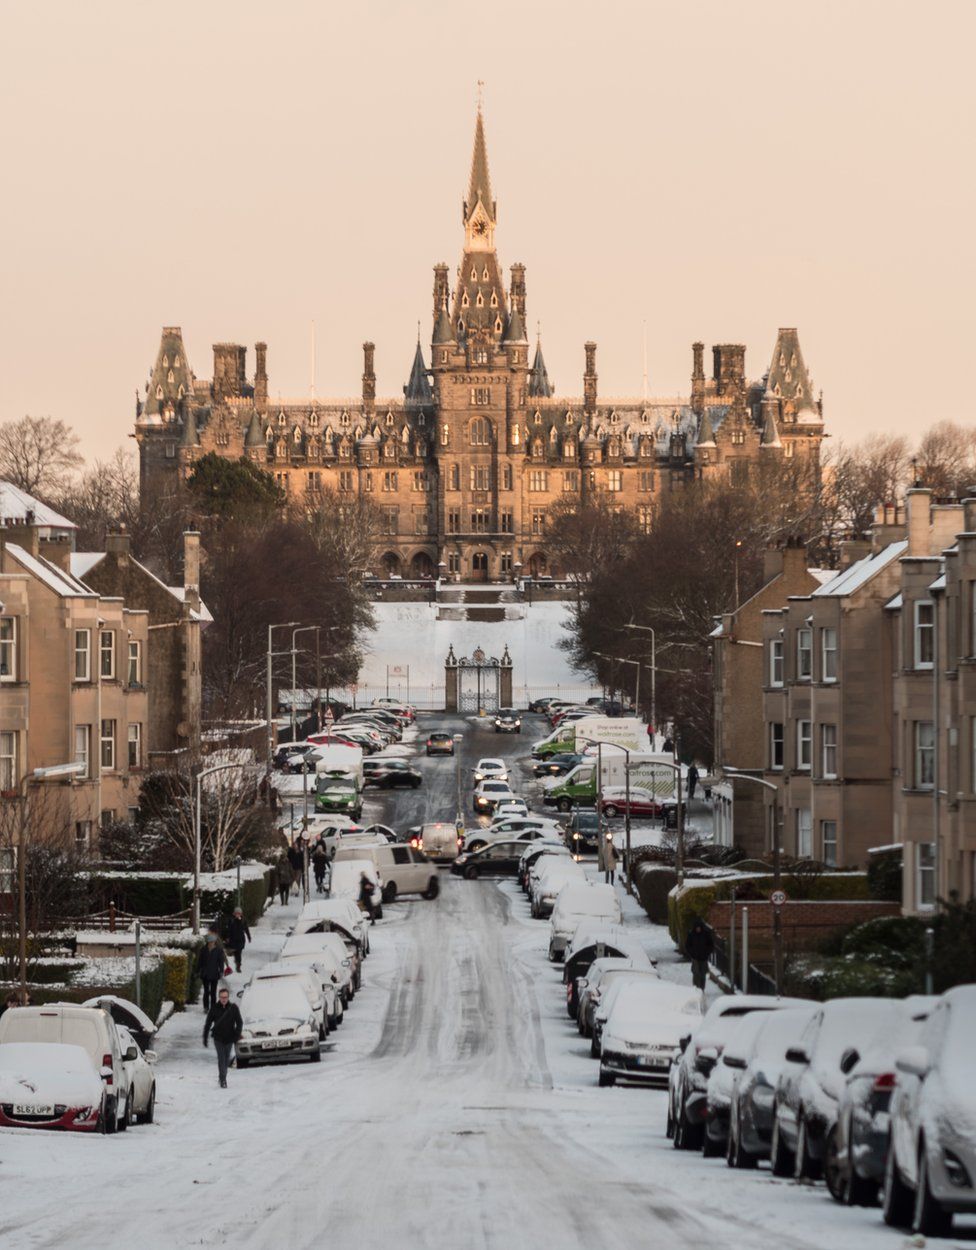 Richard Tynan took this photo of Fettes College in Edinburgh as the sun came up